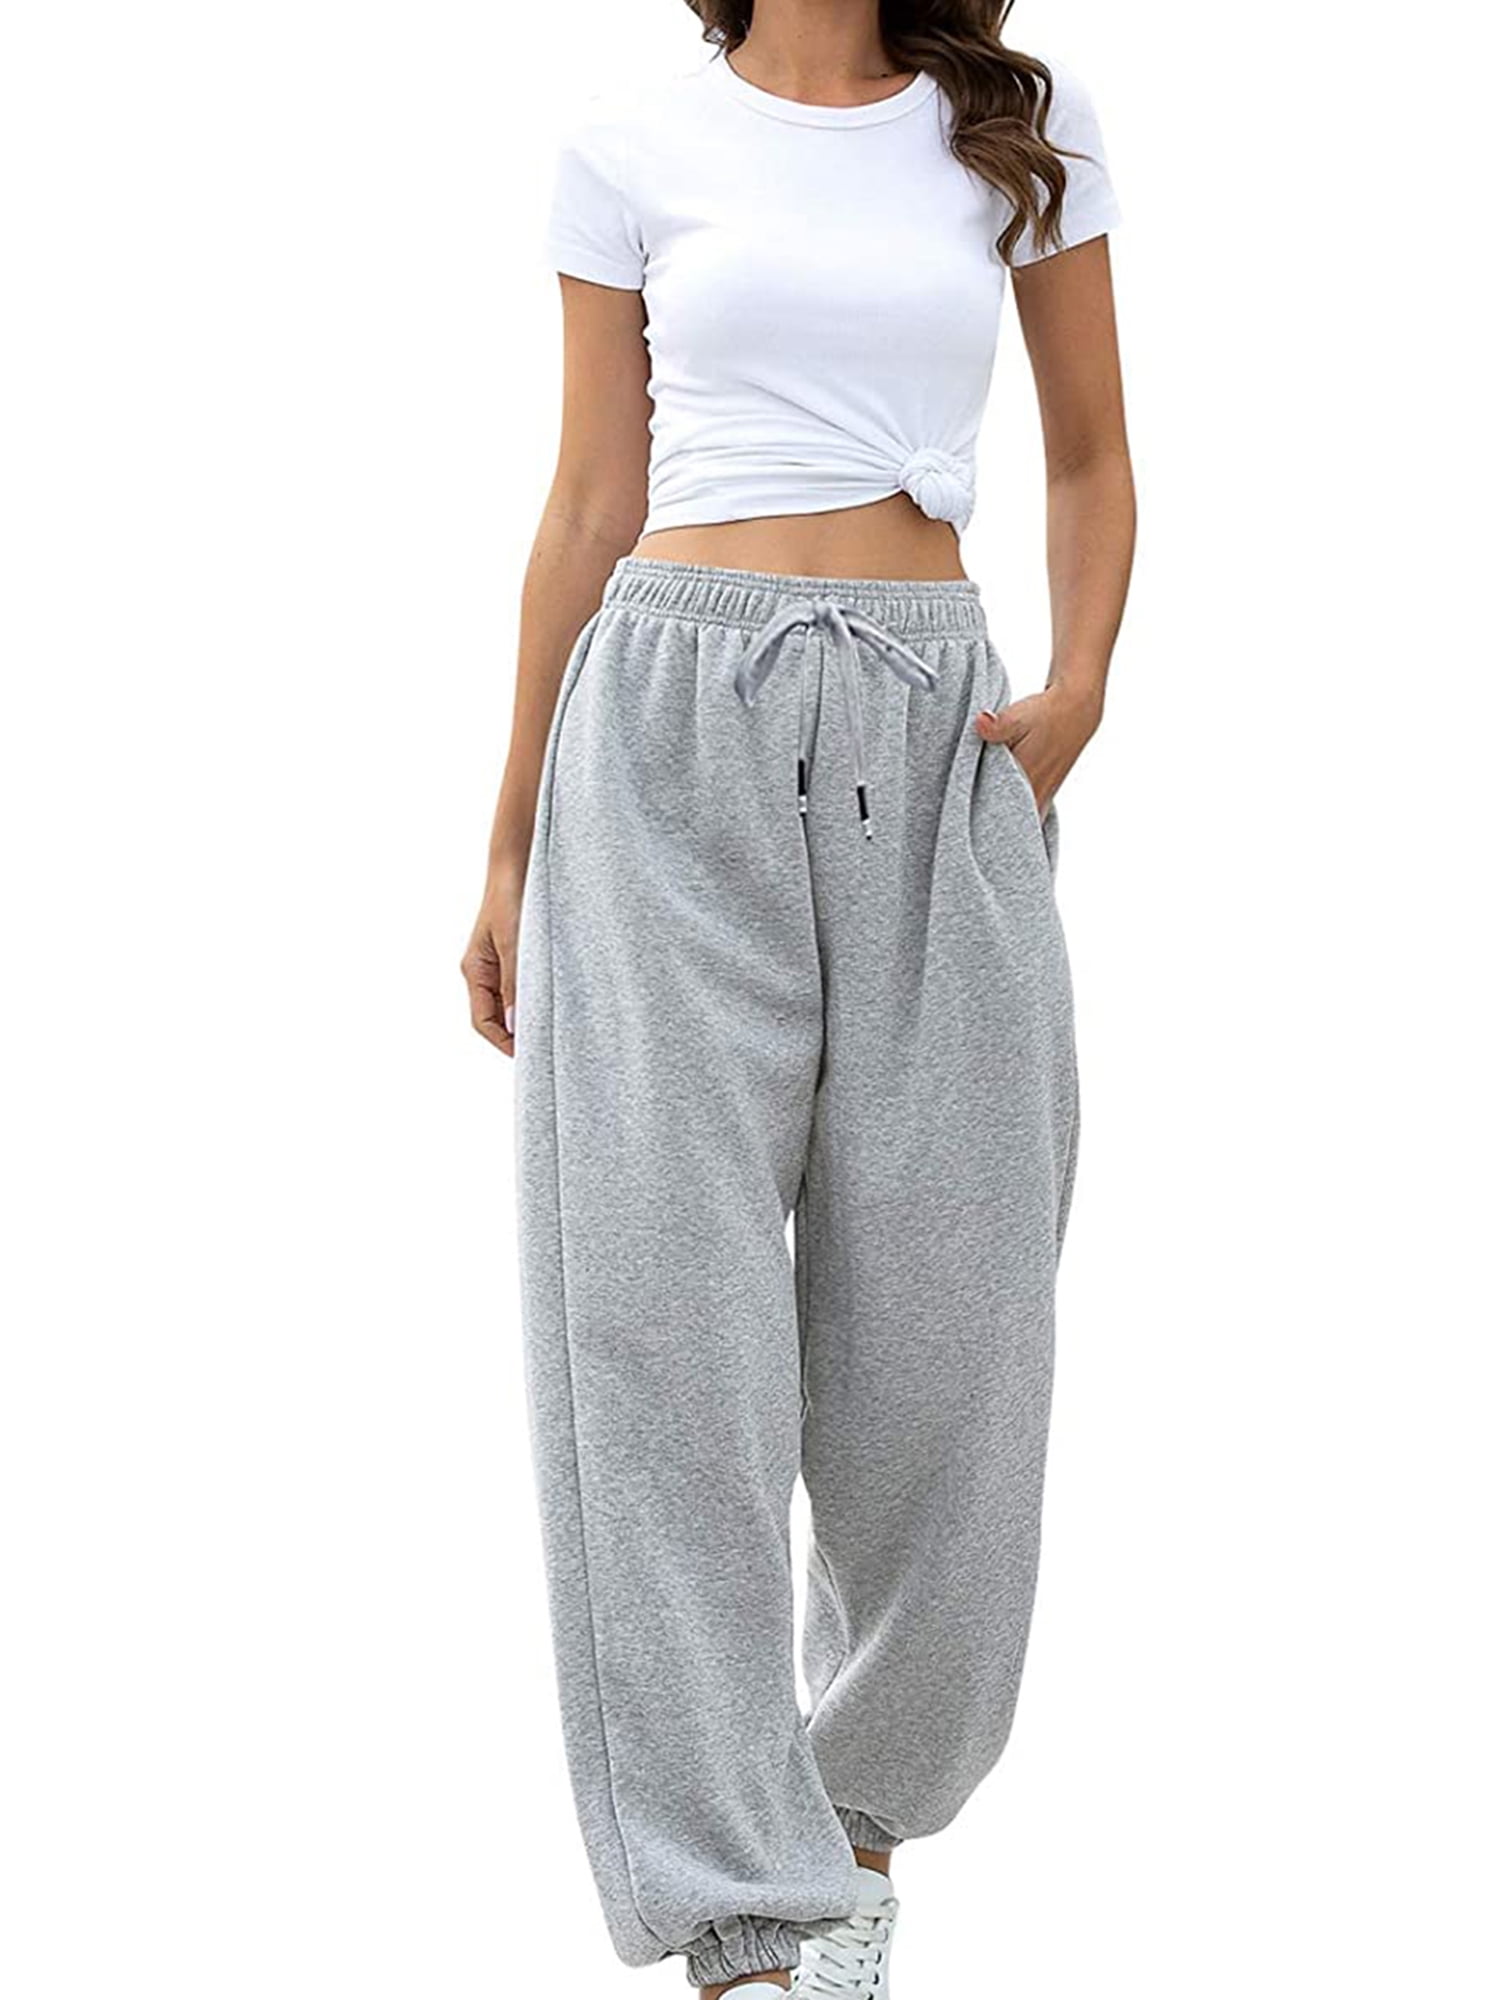 TOPGOD Women Sweatpants Drawstring Elastic-Waist Long Trousers with Pockets  for Girls Baggy Pants